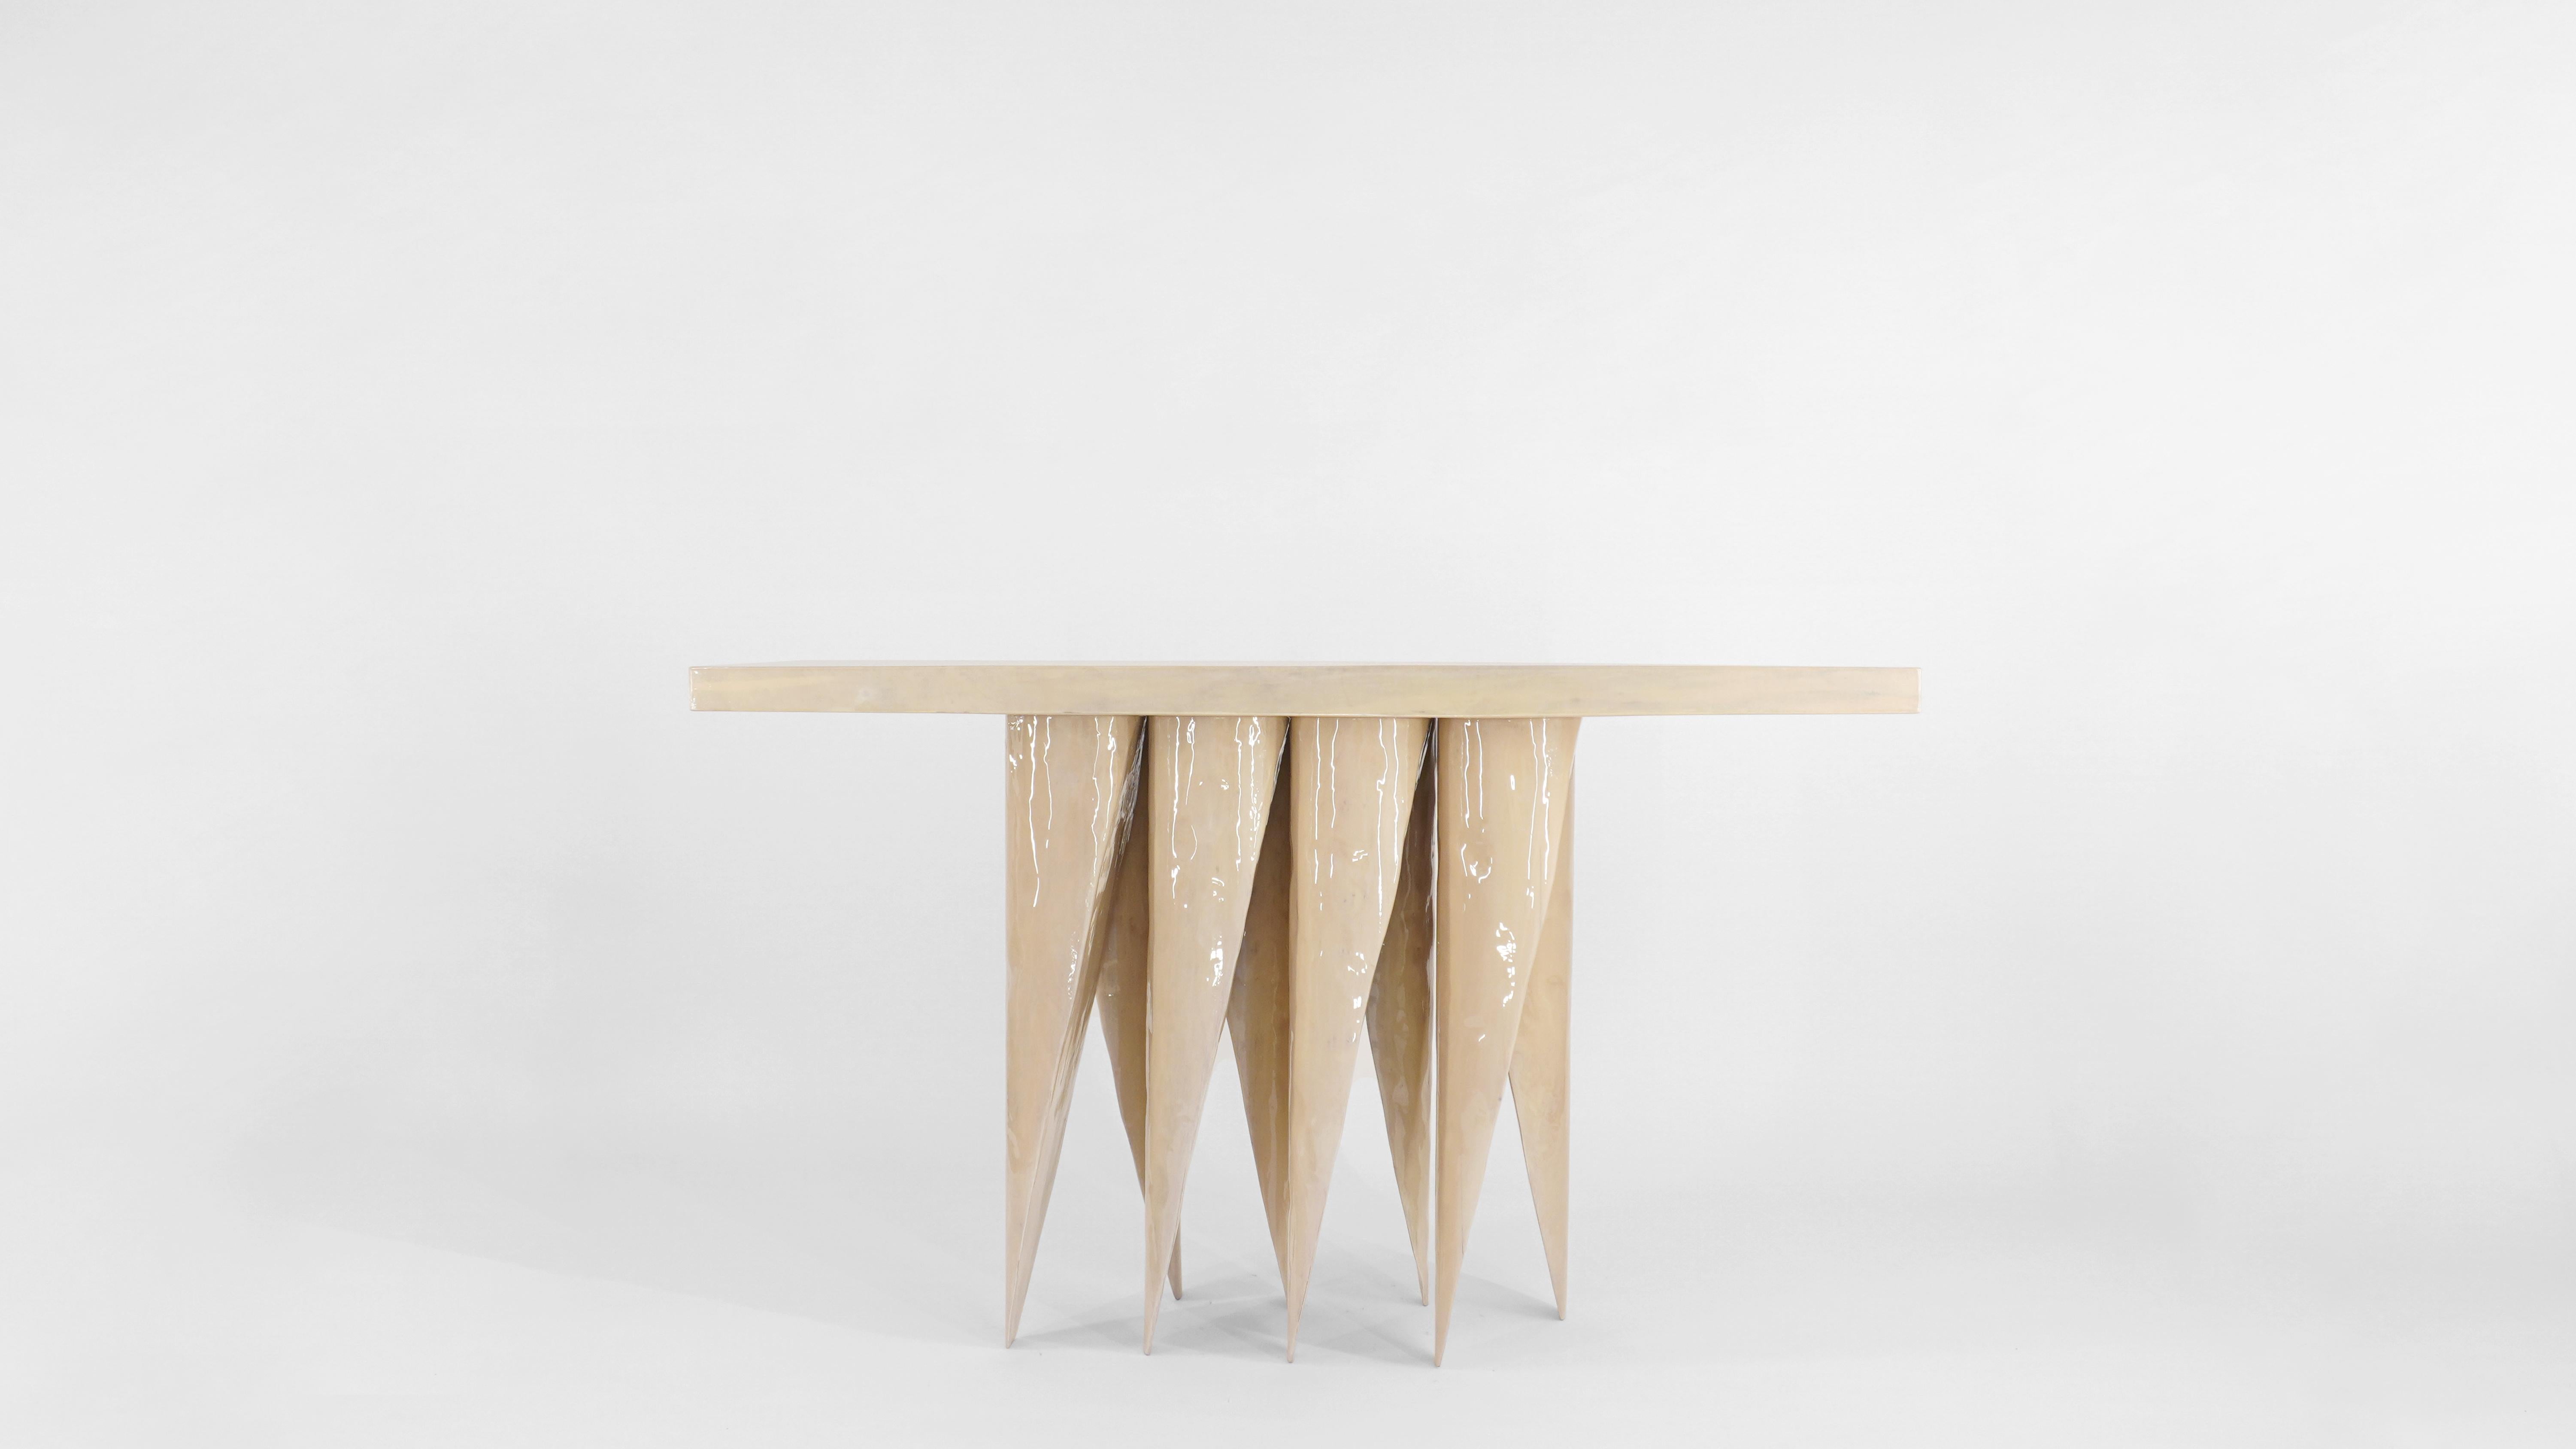 Obeisance Console Table by Henry D'ath
Dimensions: D 150 x W 45 x H 85 cm
Materials: Wood.
Available finishes: Natural, Translucent Gloss. 


Henry d’ath is a New Zealand-born, Hong Kong-based artist and architect. 
Using predominantly salvaged